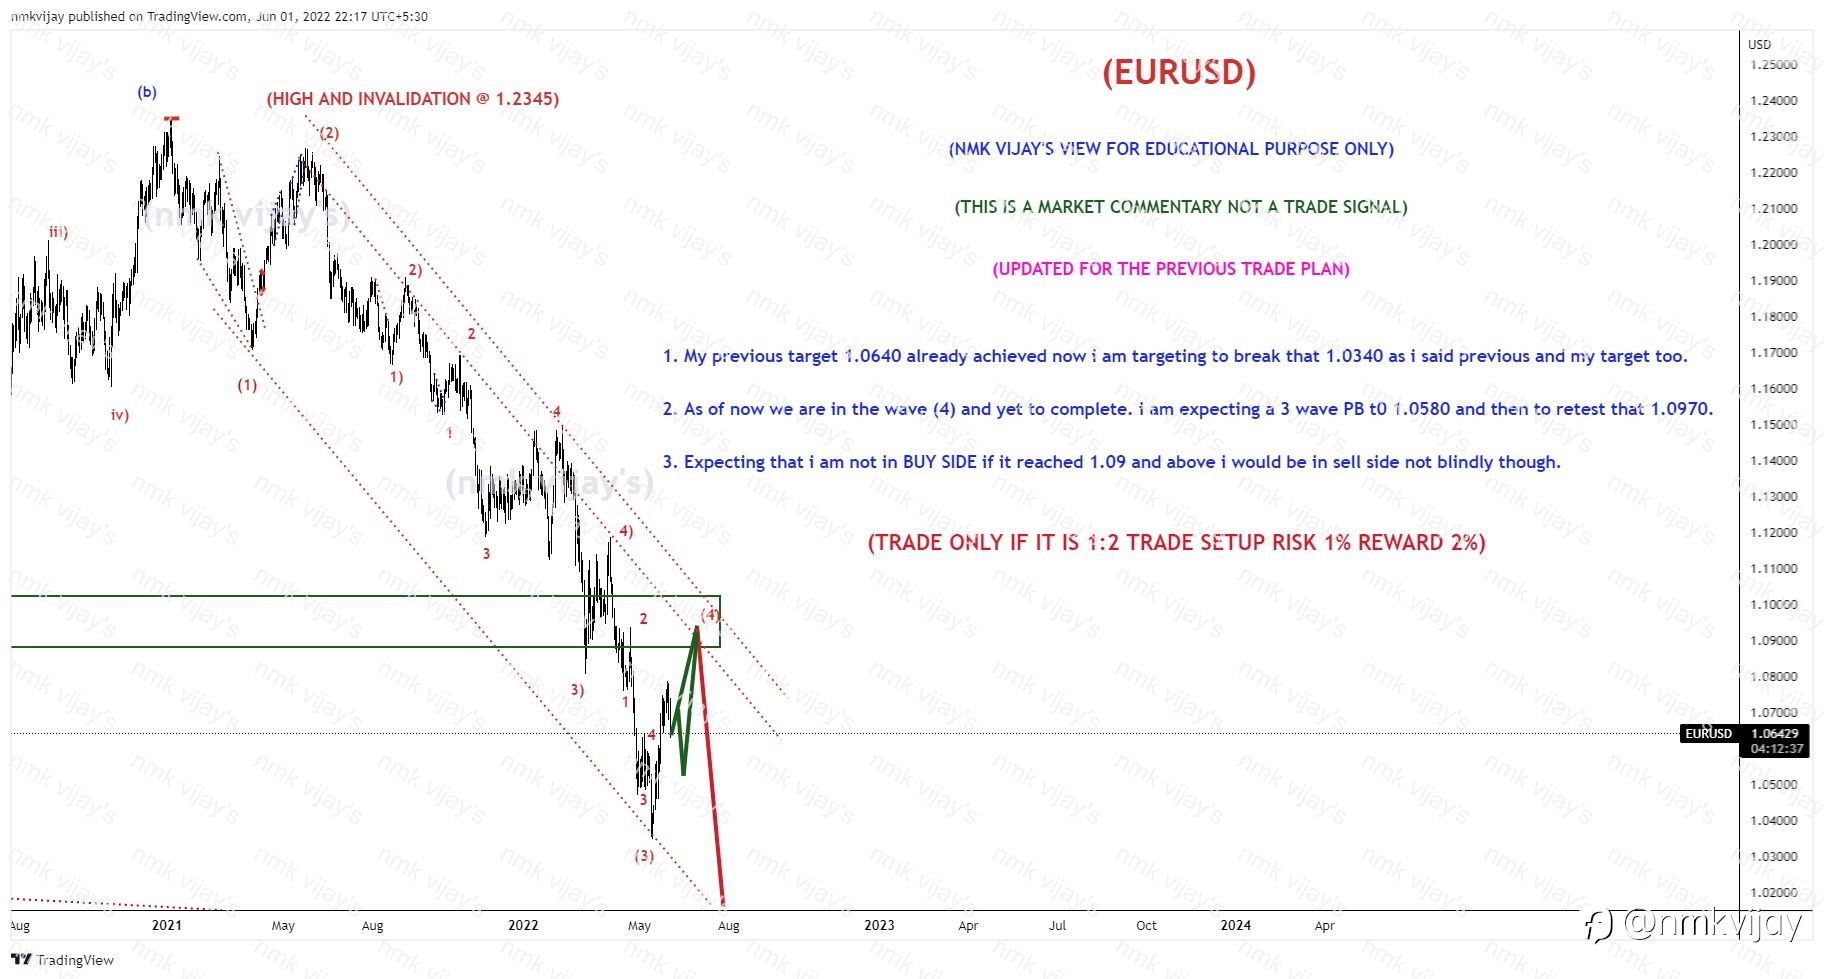 EURUSD-Expecting a PB to 1.06 and then to 1.09 and above for wave (4) to complete.